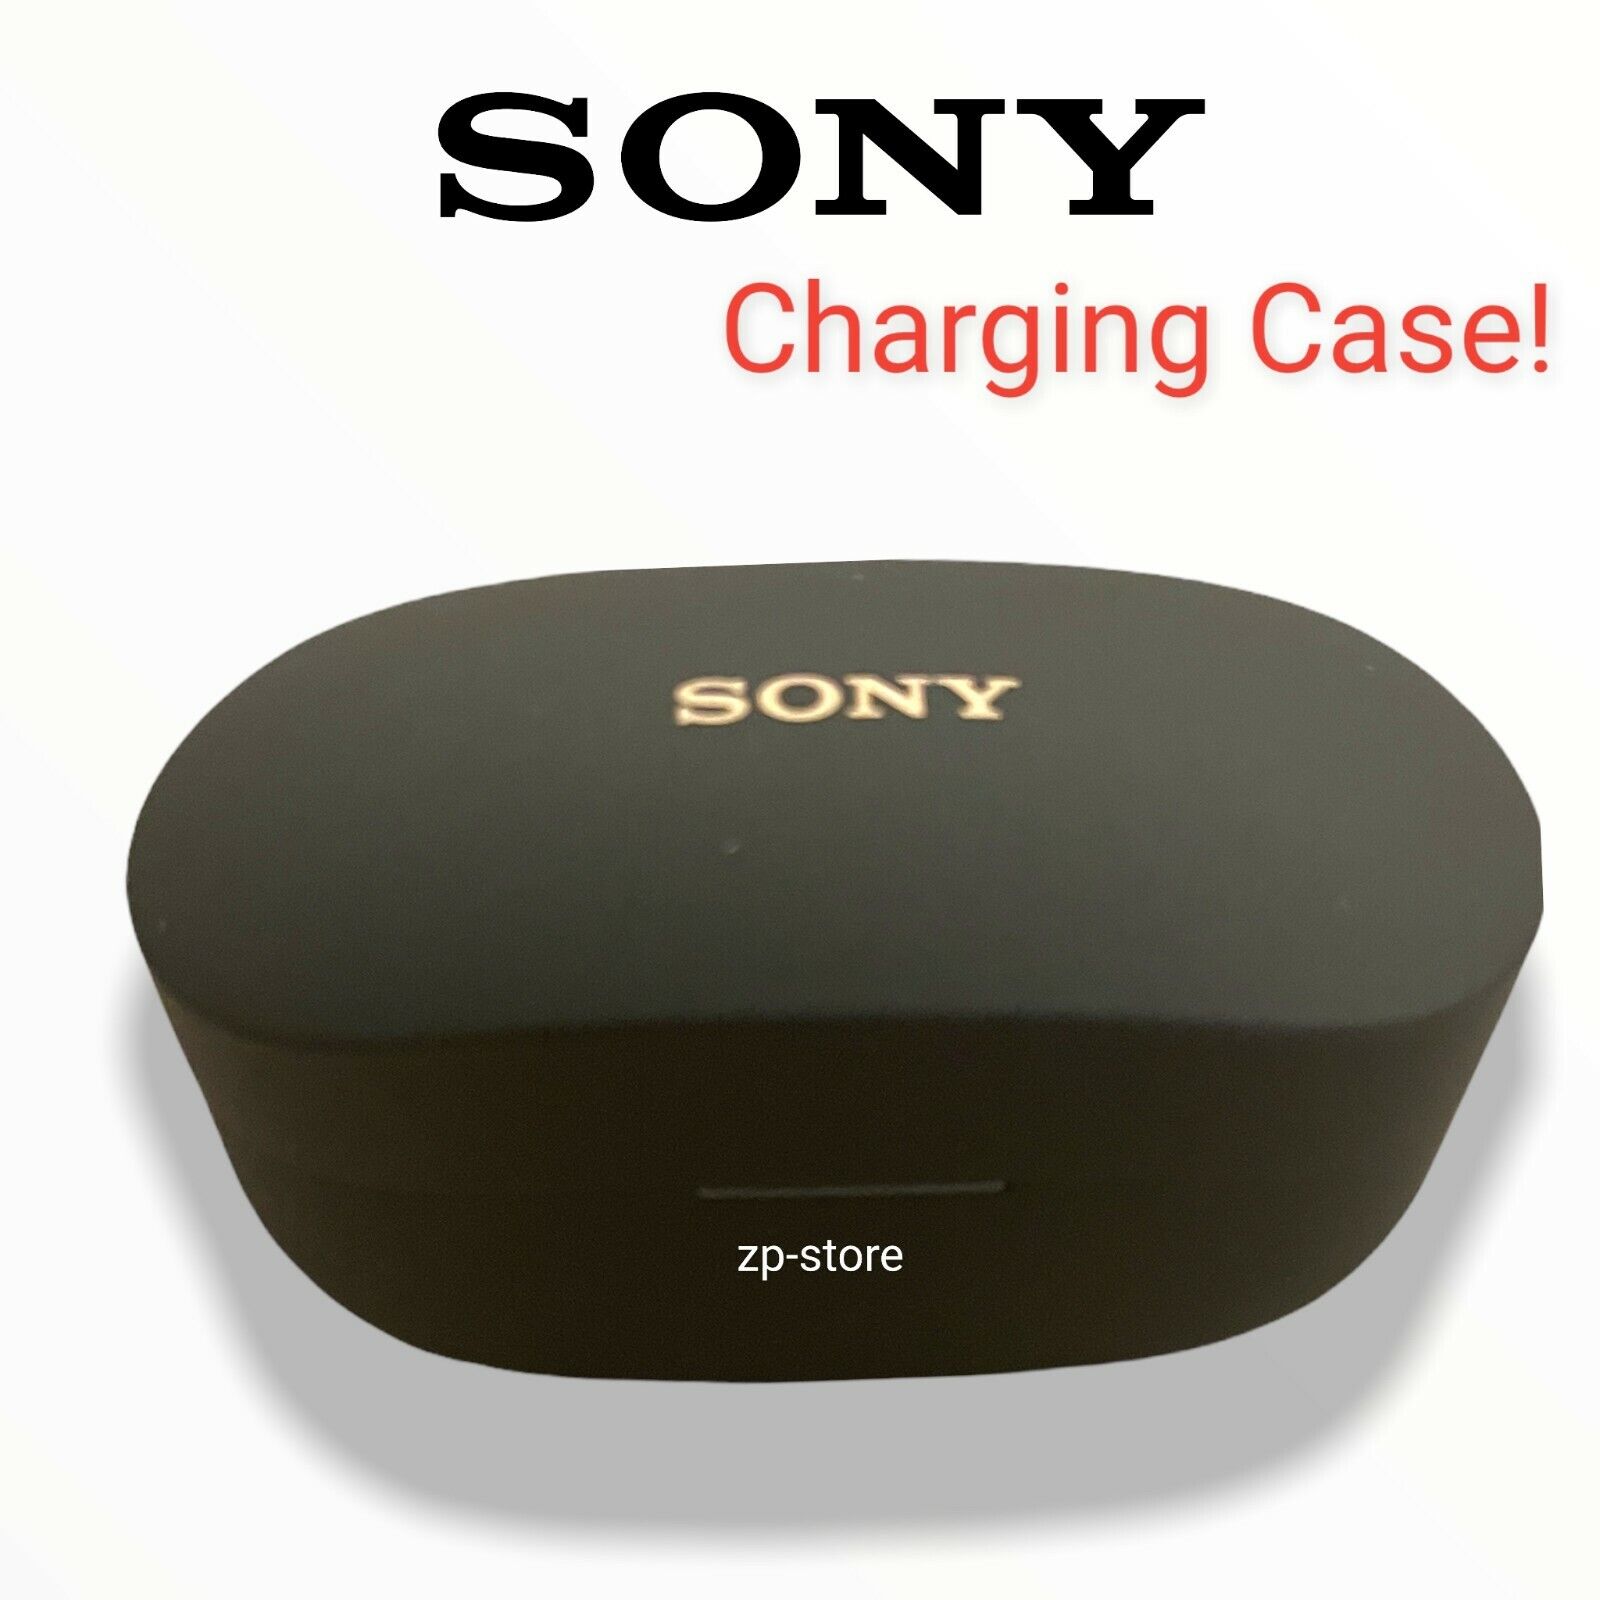 Sony WF-1000XM4 Wireless Headphones - Replacement CHARGING CASE ONLY - Black